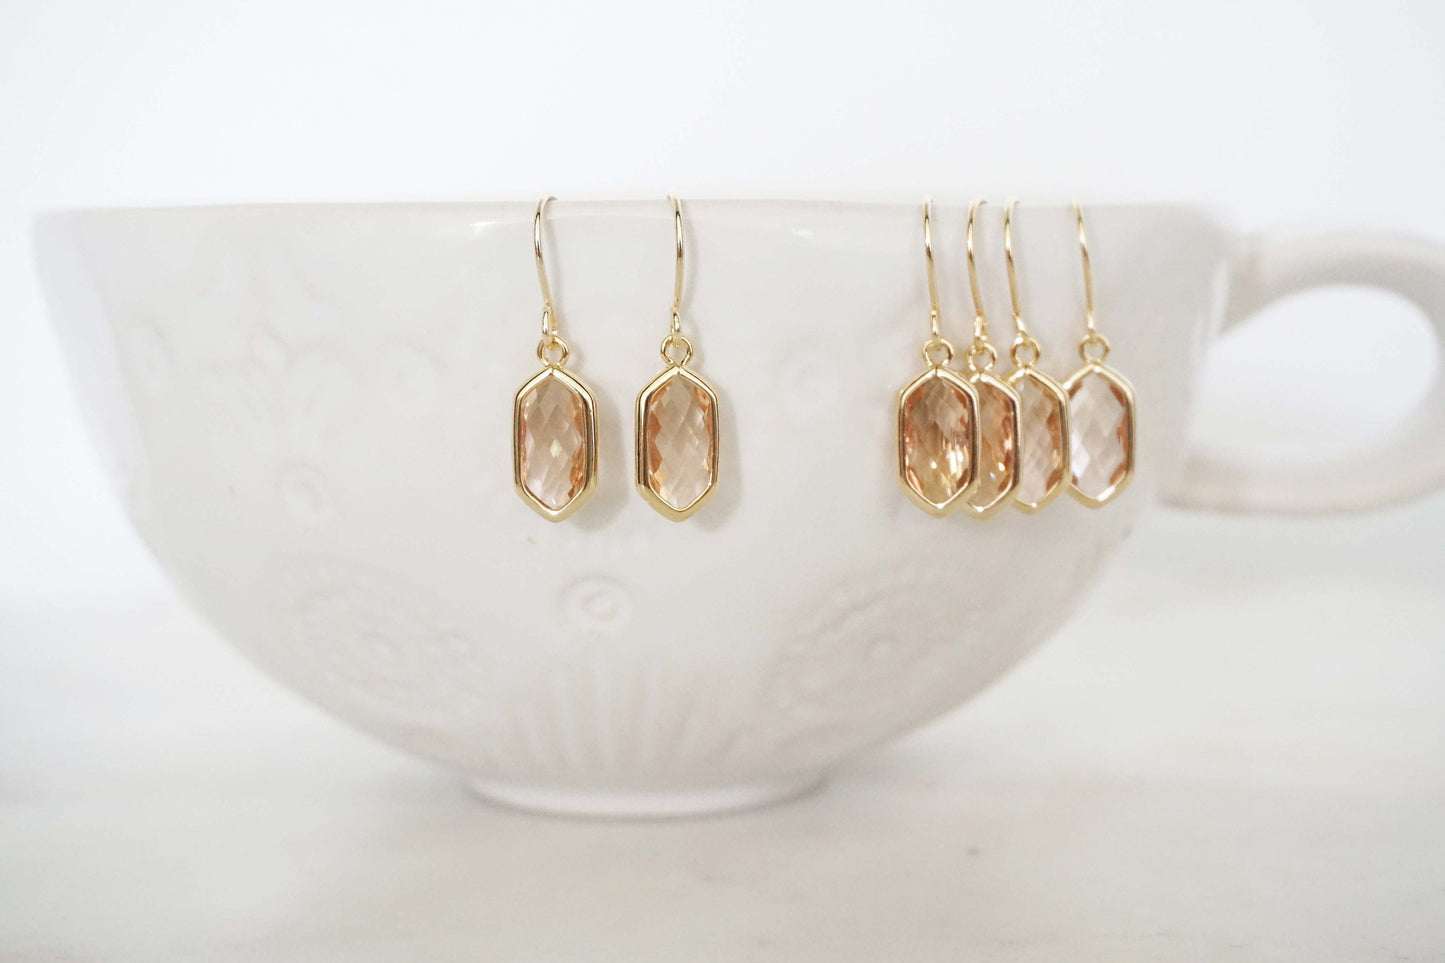 Champagne Gem Hexagon Earrings and Necklace Set | Bridesmaid Earrings | Wedding Jewelry | ENCHPG33, ENCHPS33